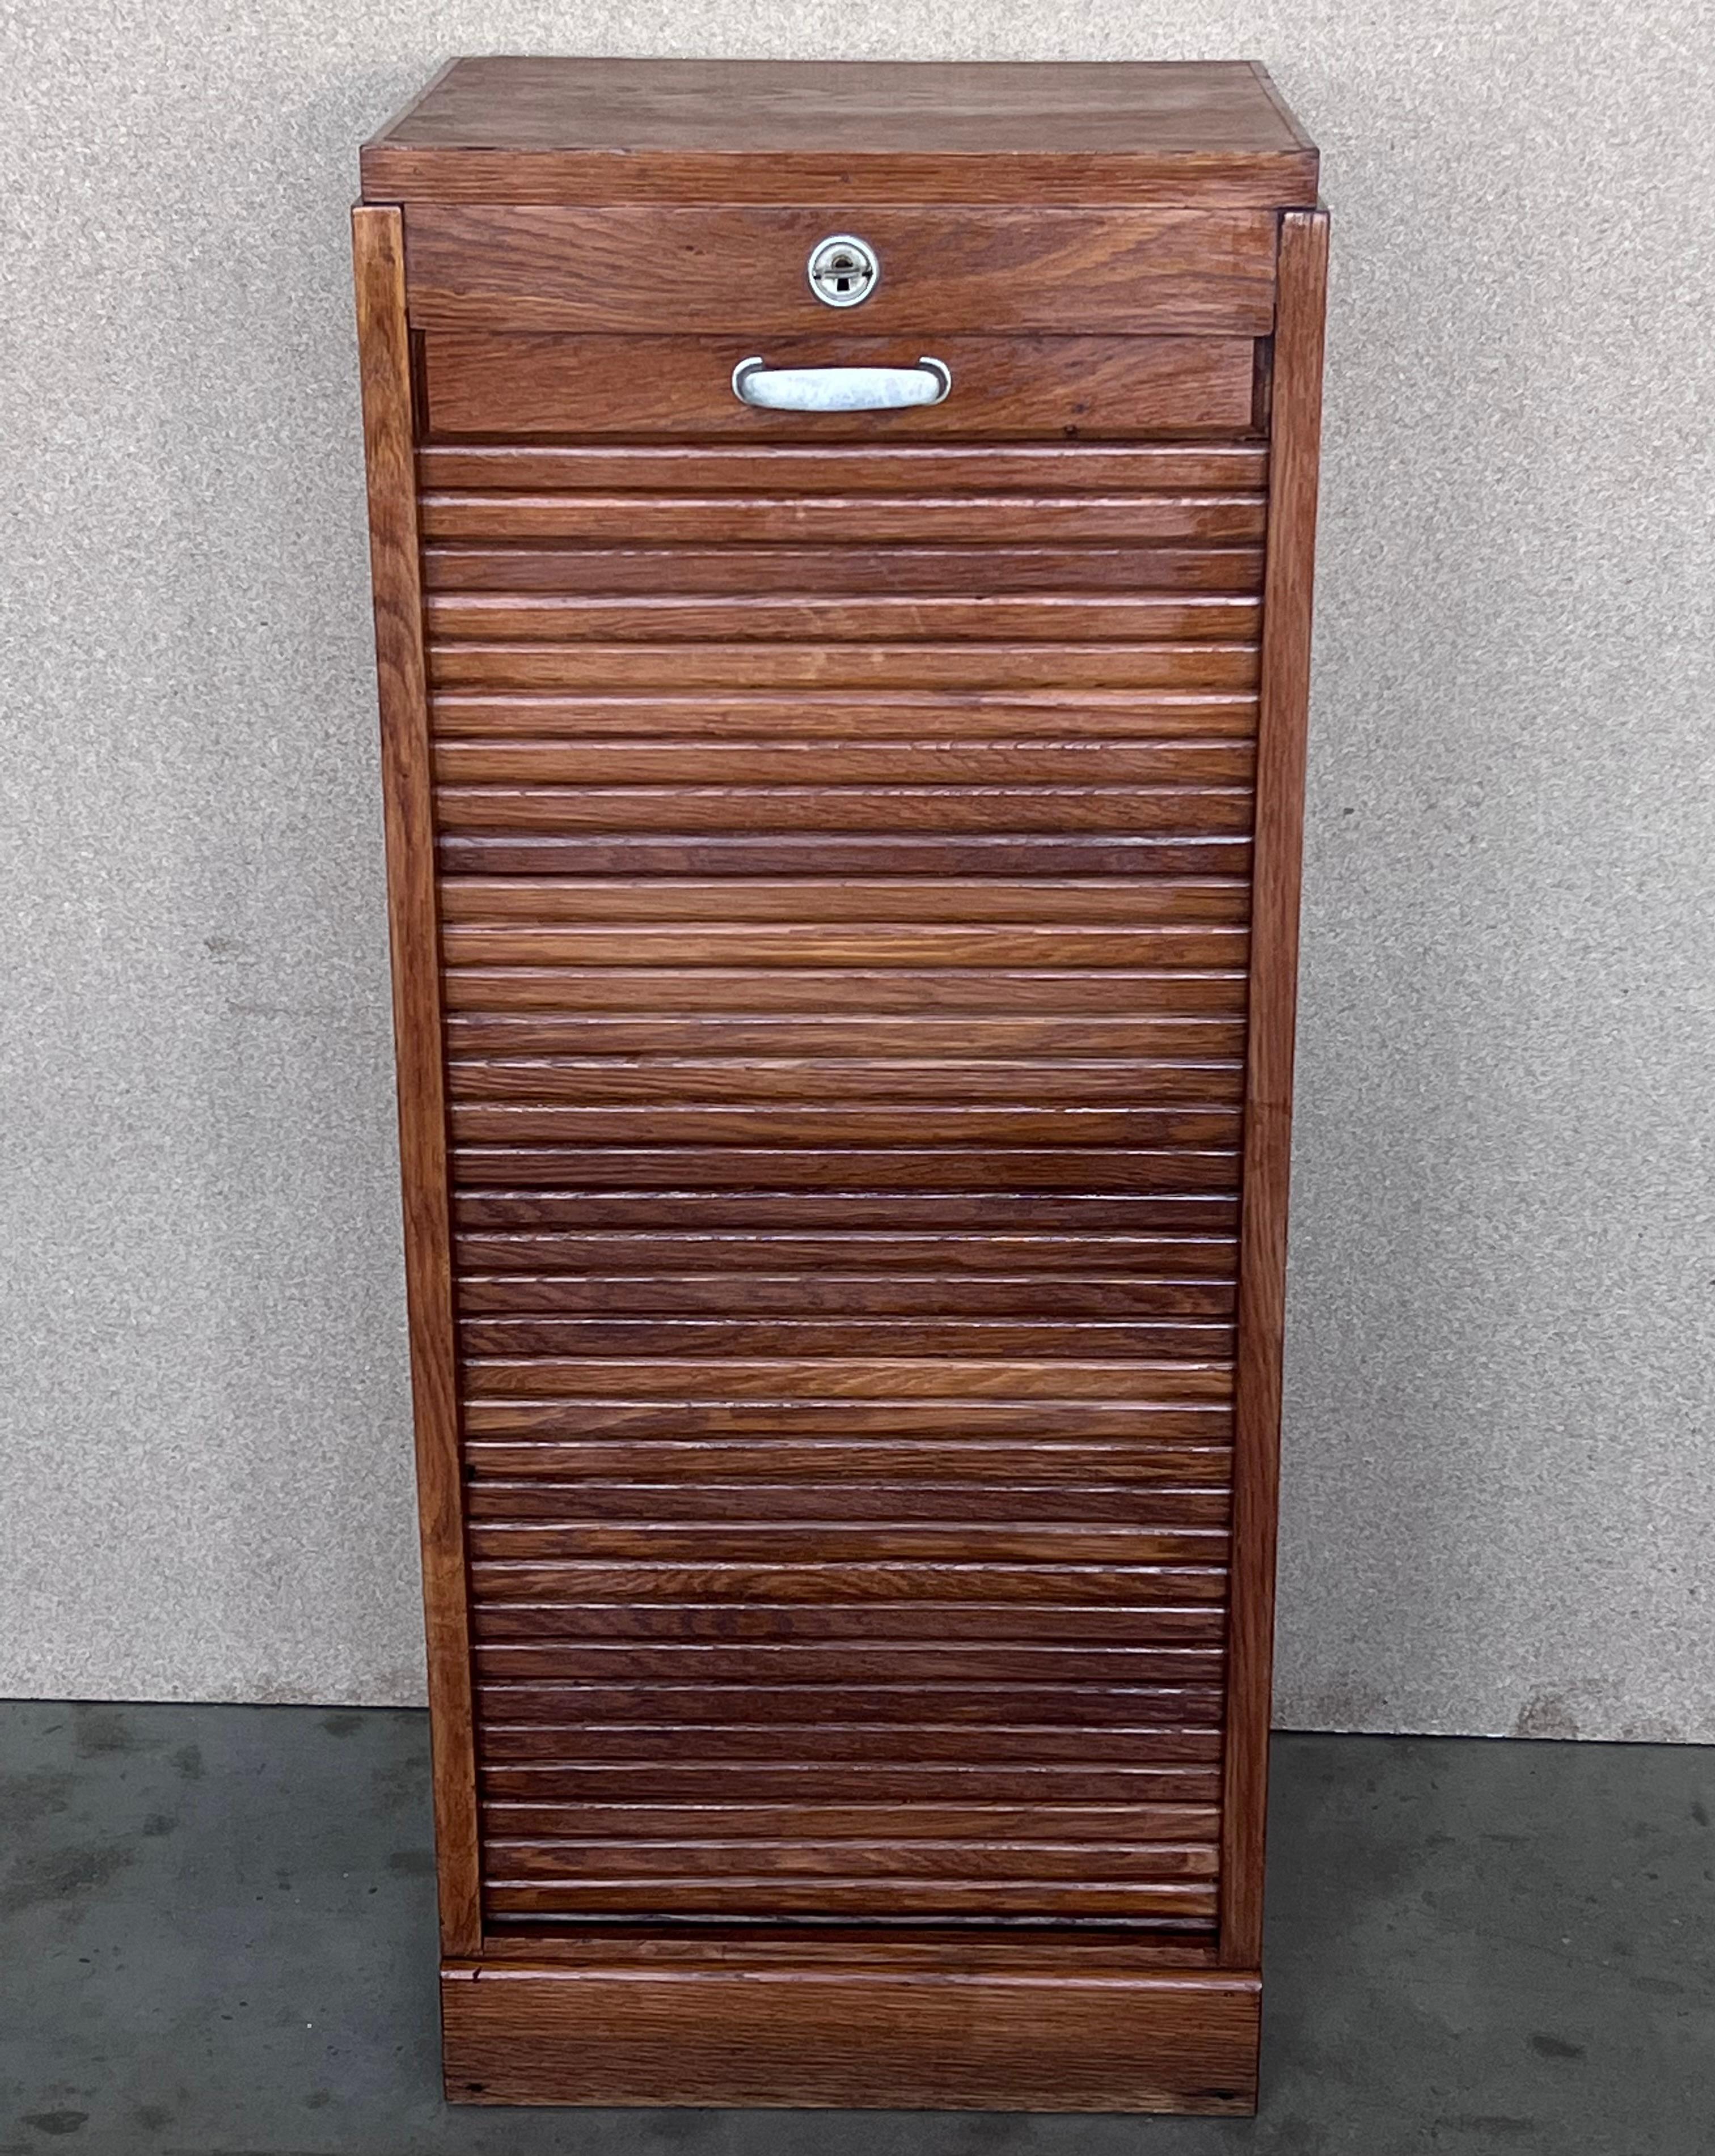 This French filing cabinet is another good example of the quality furniture that was made in those days. The angular design and wonderful warm walnut-colored patina are a delight to the eye. However, this original cabinet from the 1920s isn't just